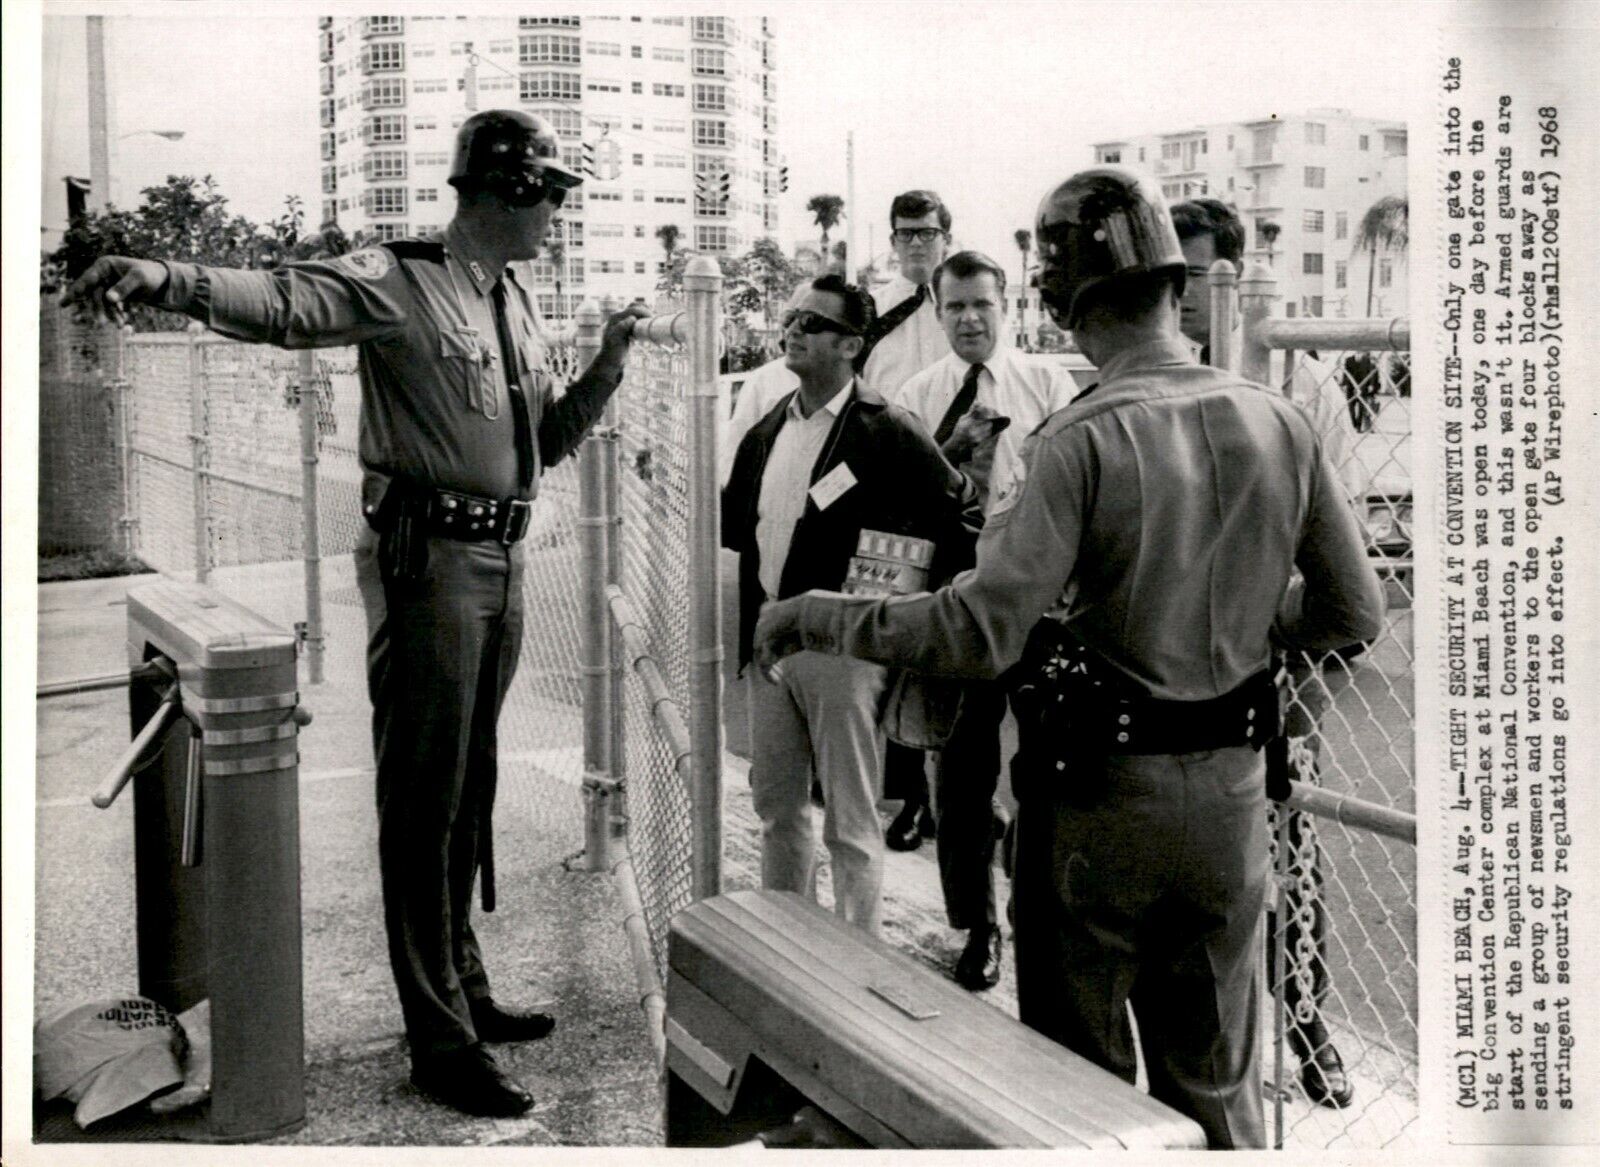 LG916 1968 AP Wire Photo TIGHT SECURITY AT CONVENTION SITE REPUBLICAN CONVENTION